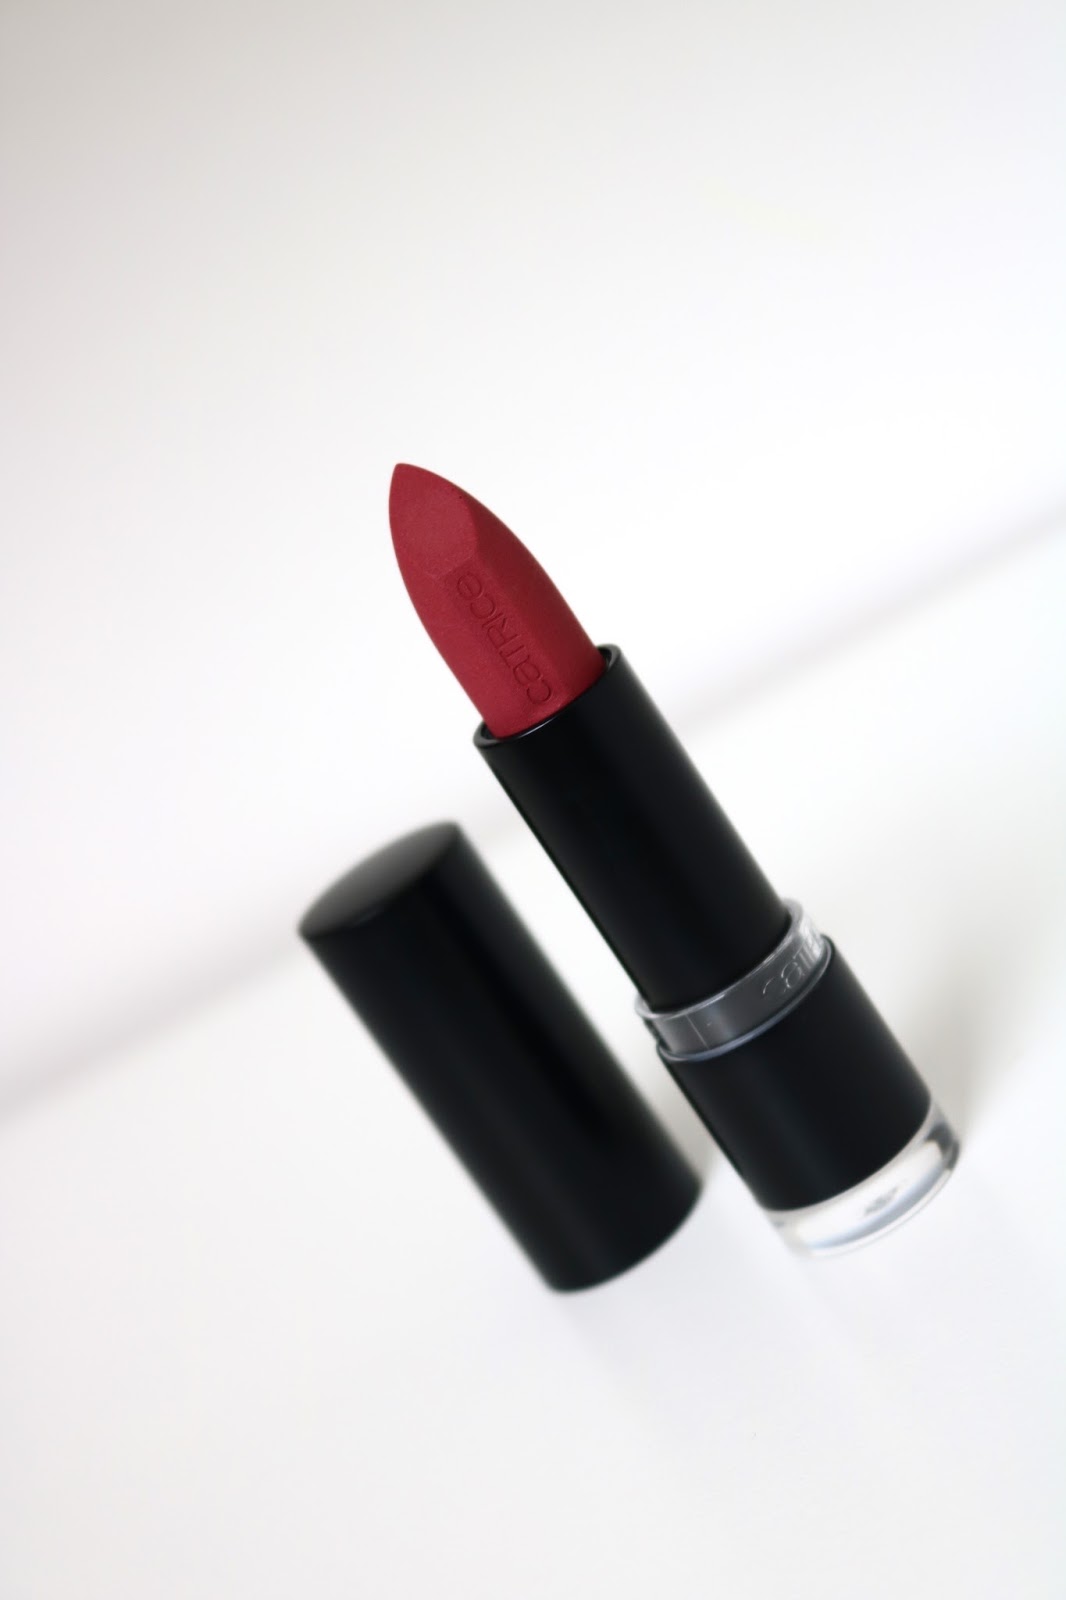 Review | Catrice Ultimate Matte lipstick 020.